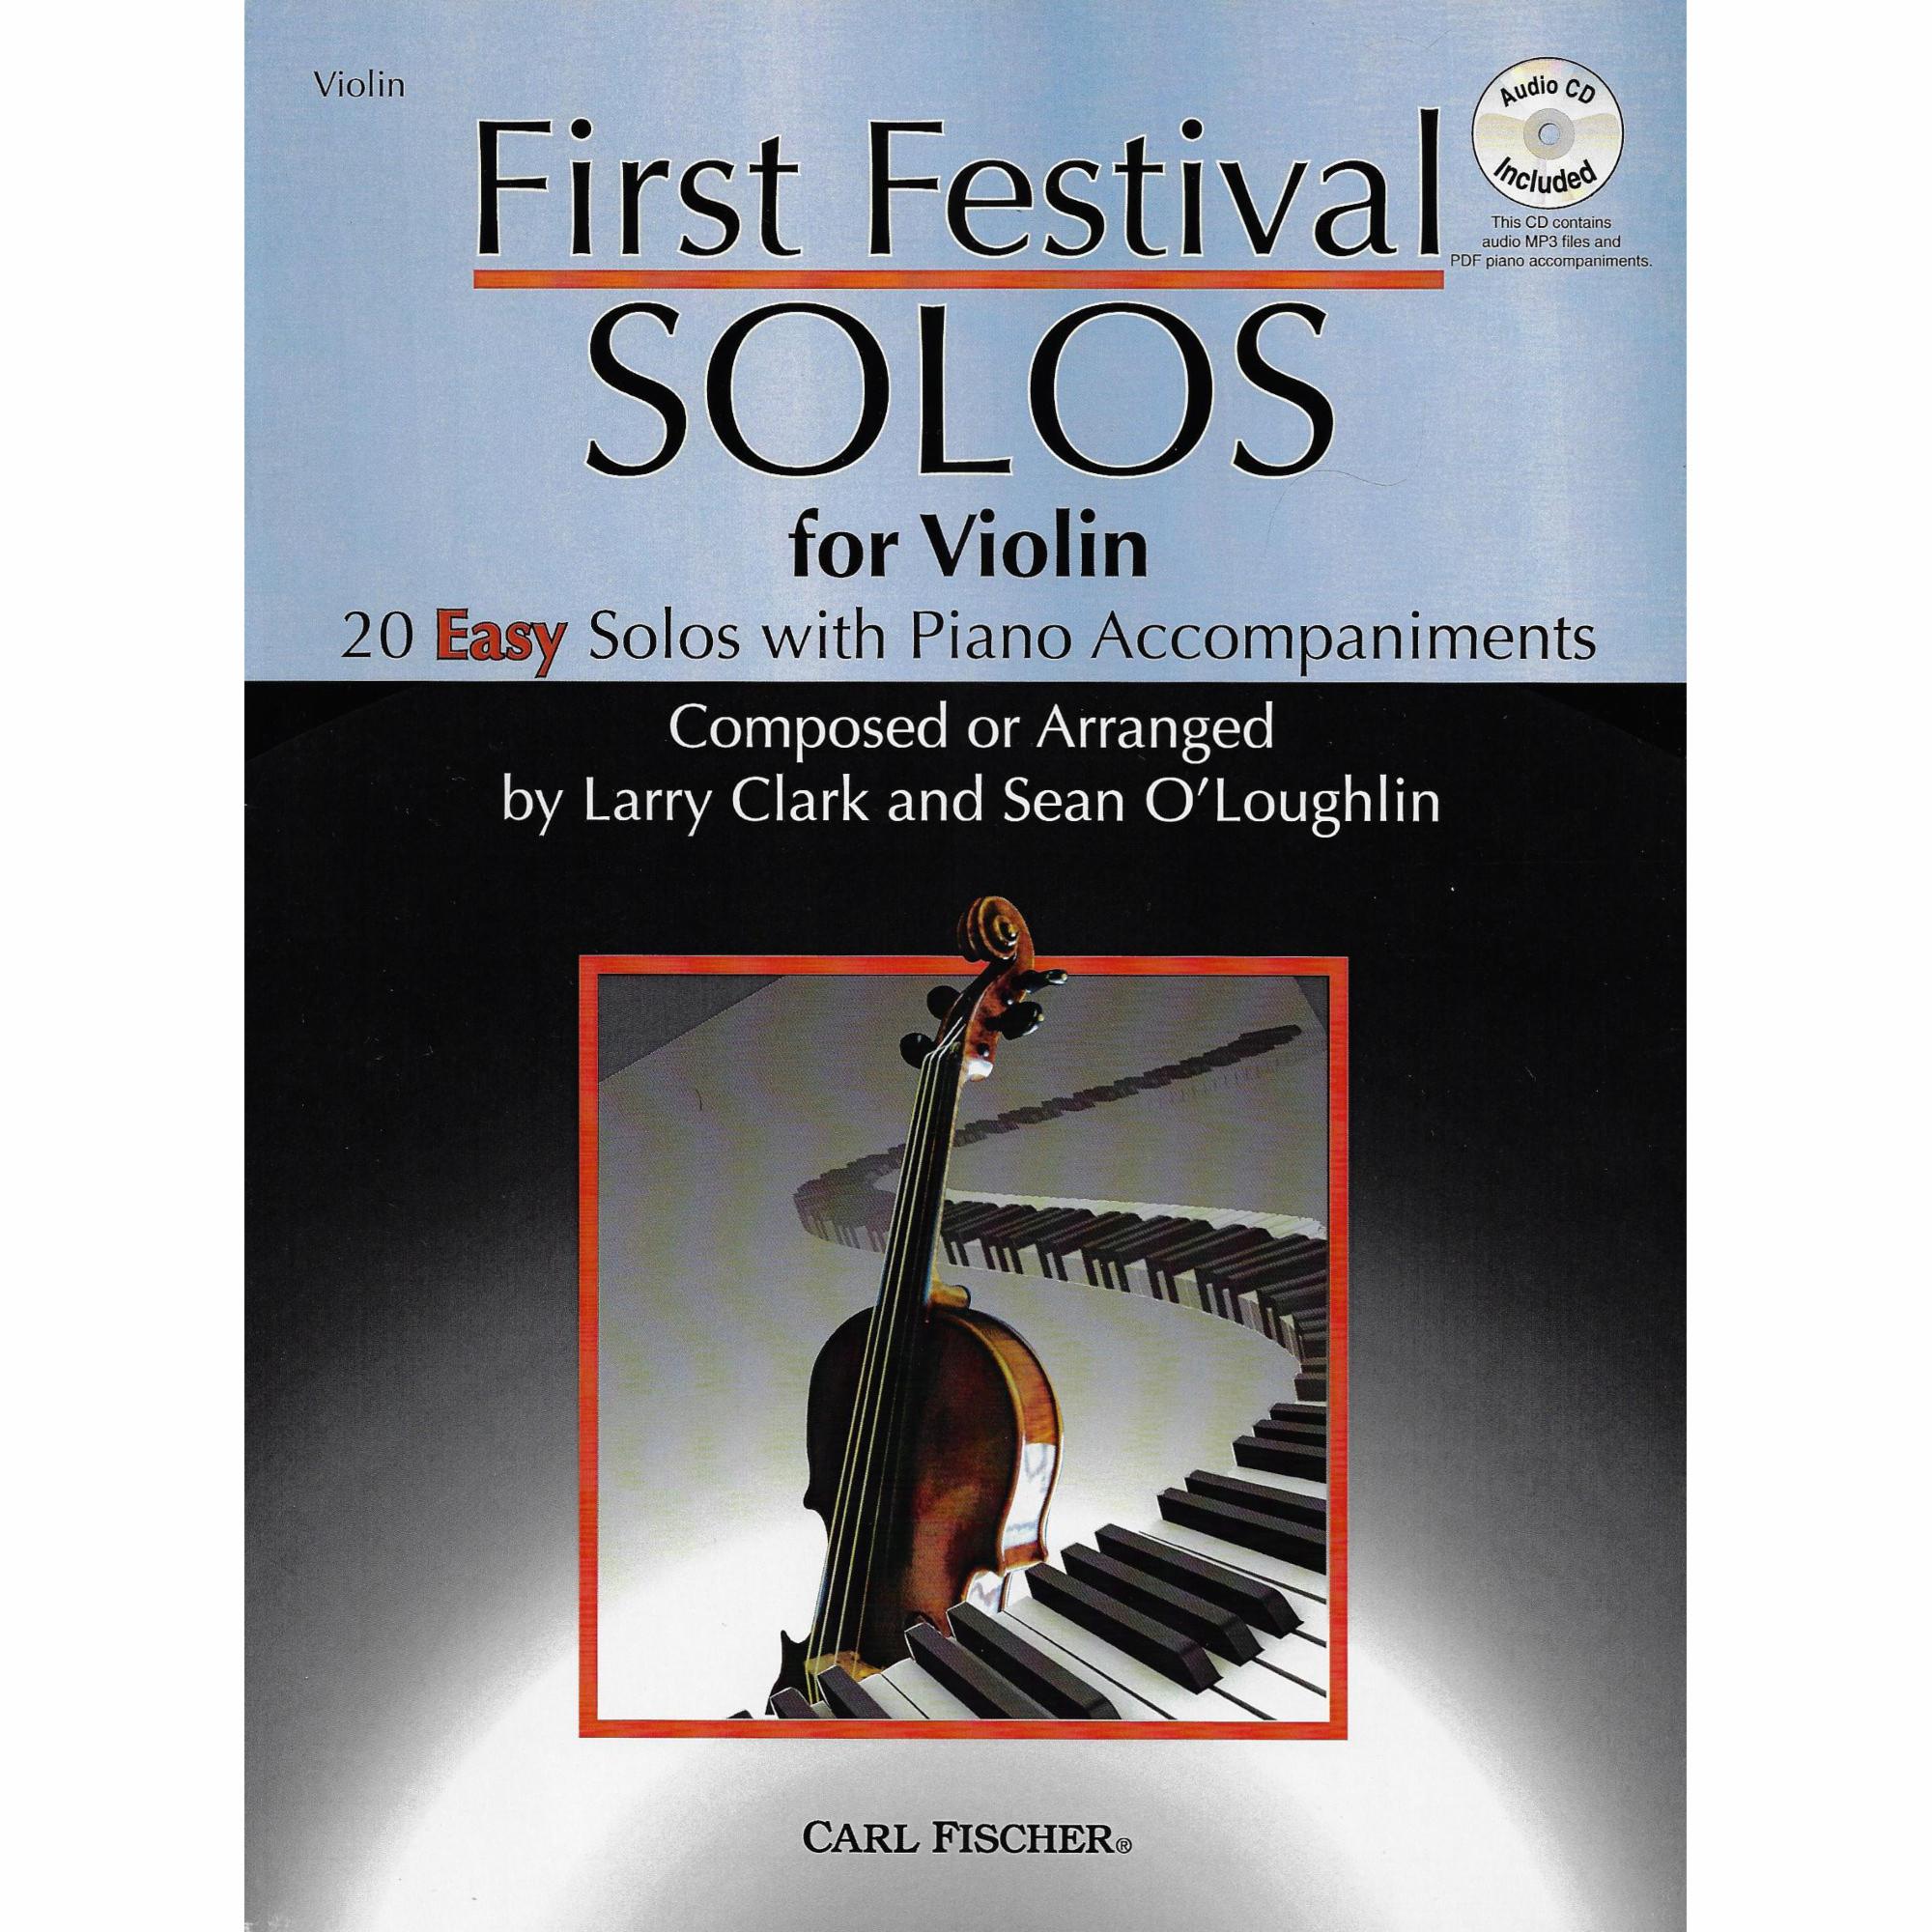 First Festival Solos for Violin